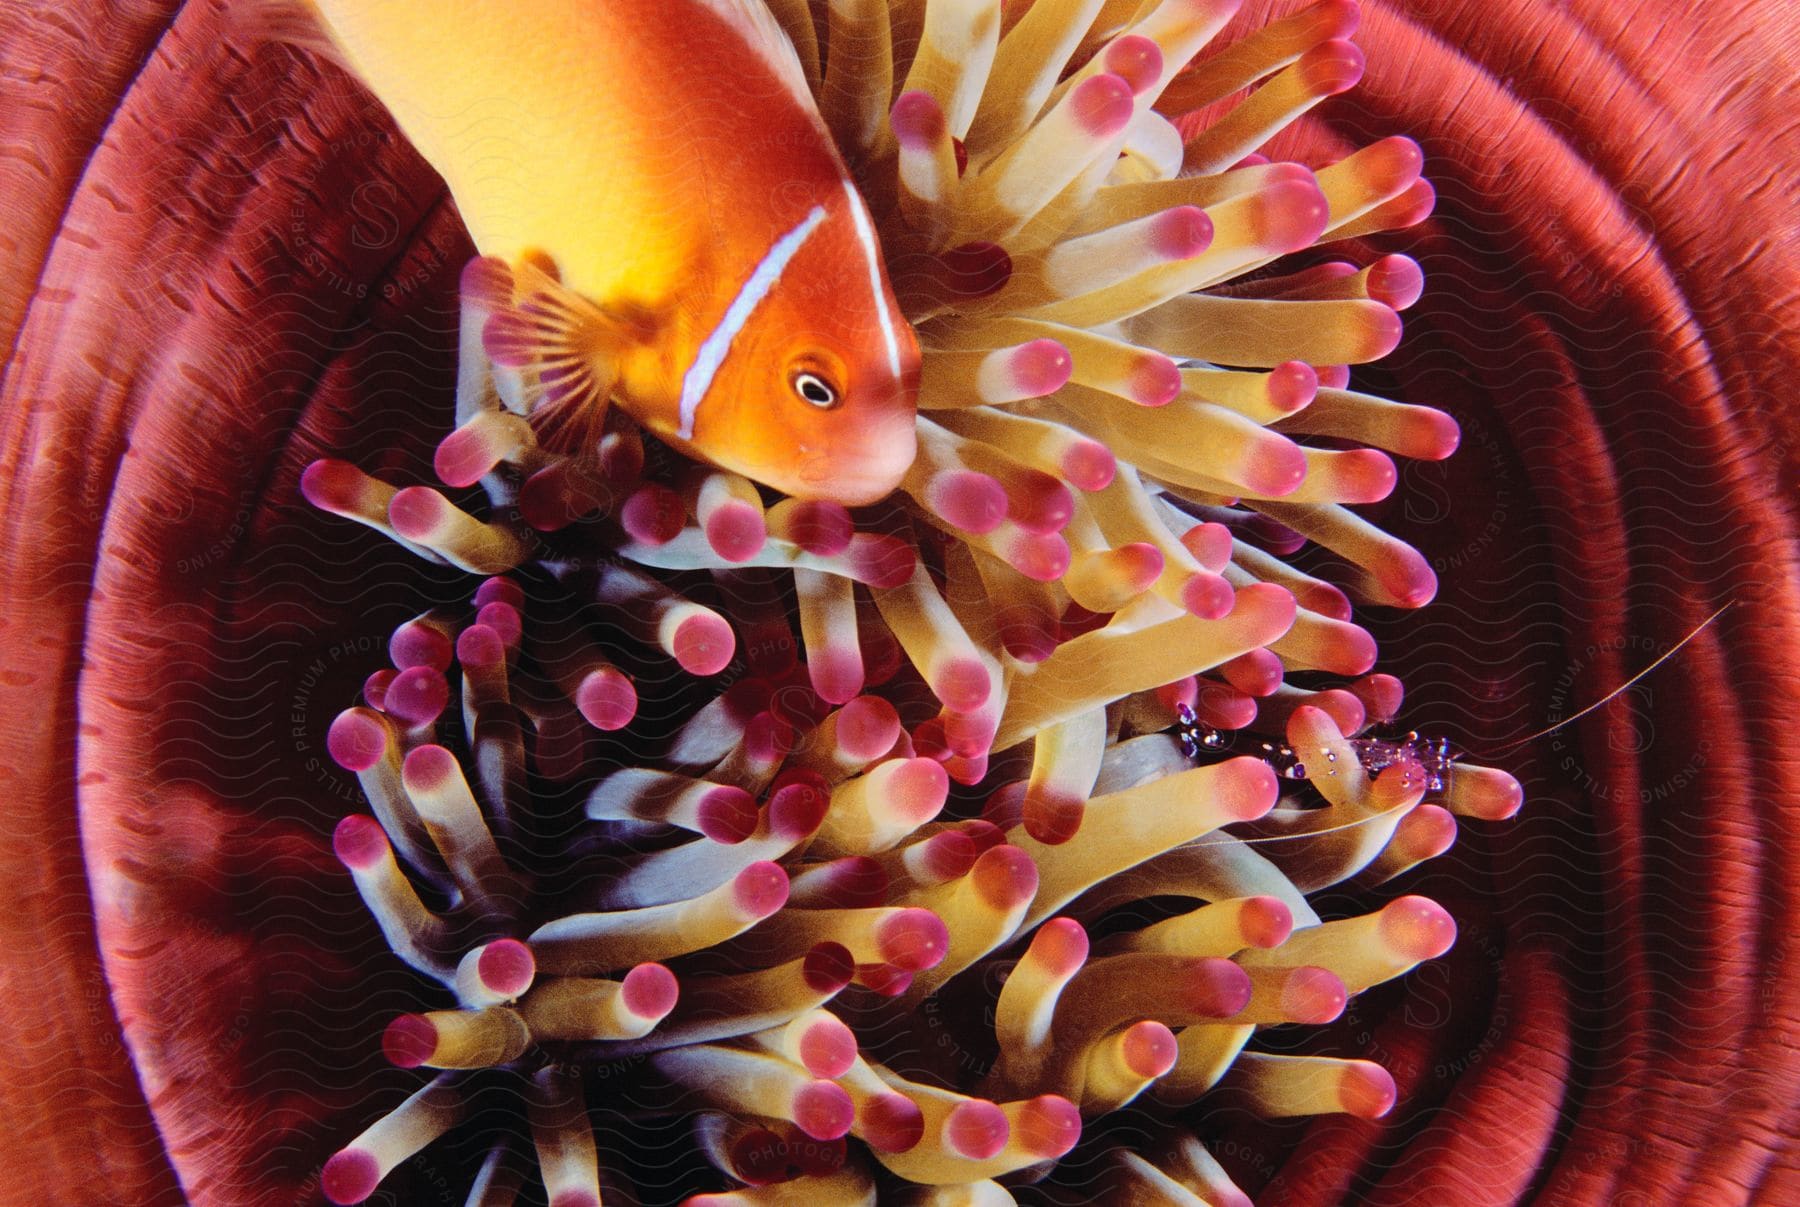 A fish swims up to a sea anemone in the ocean